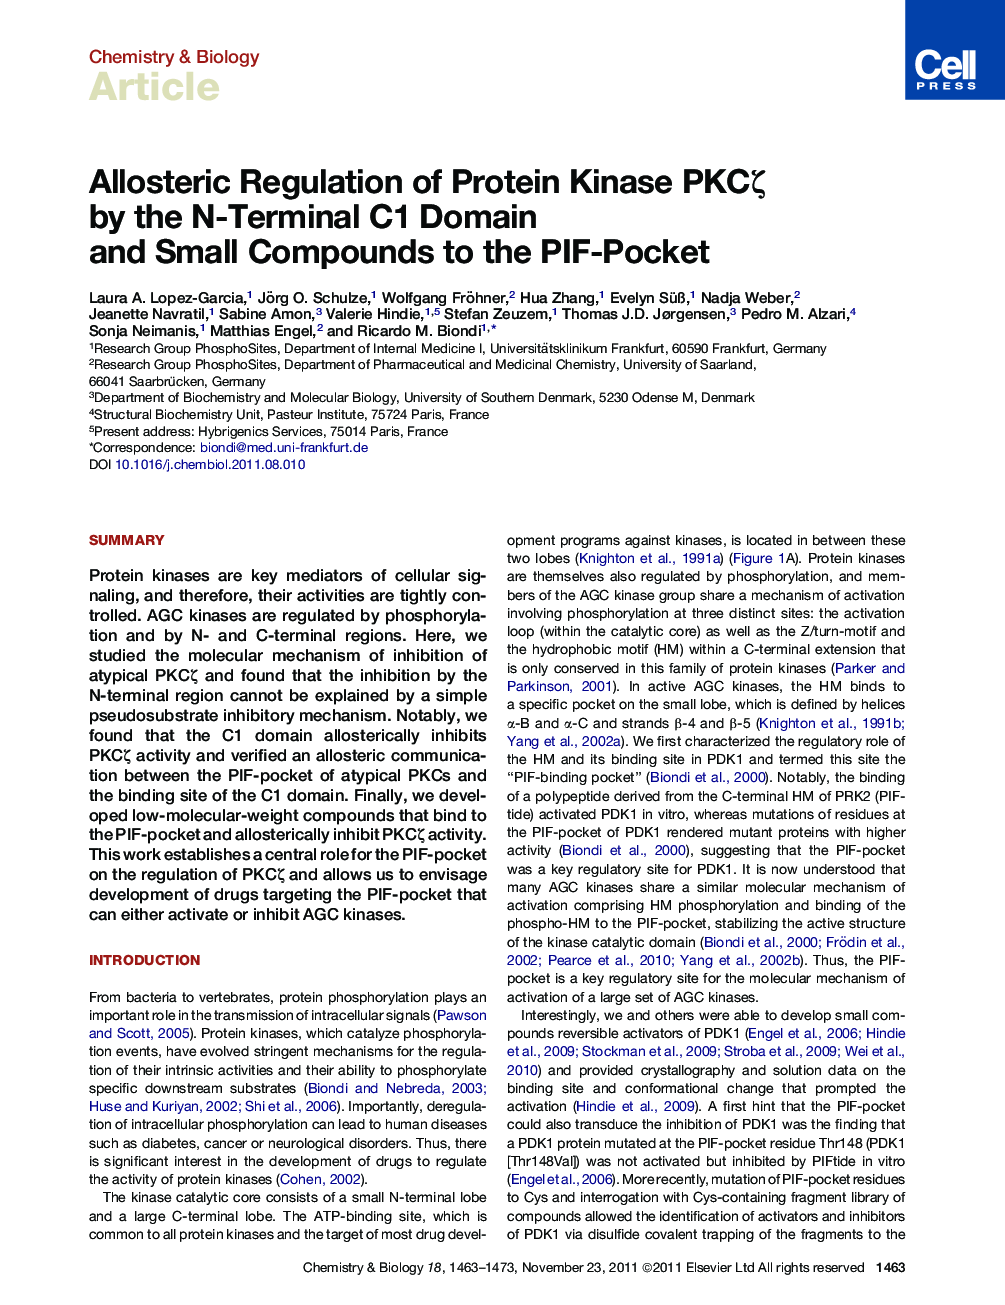 Allosteric Regulation of Protein Kinase PKCζ by the N-Terminal C1 Domain and Small Compounds to the PIF-Pocket